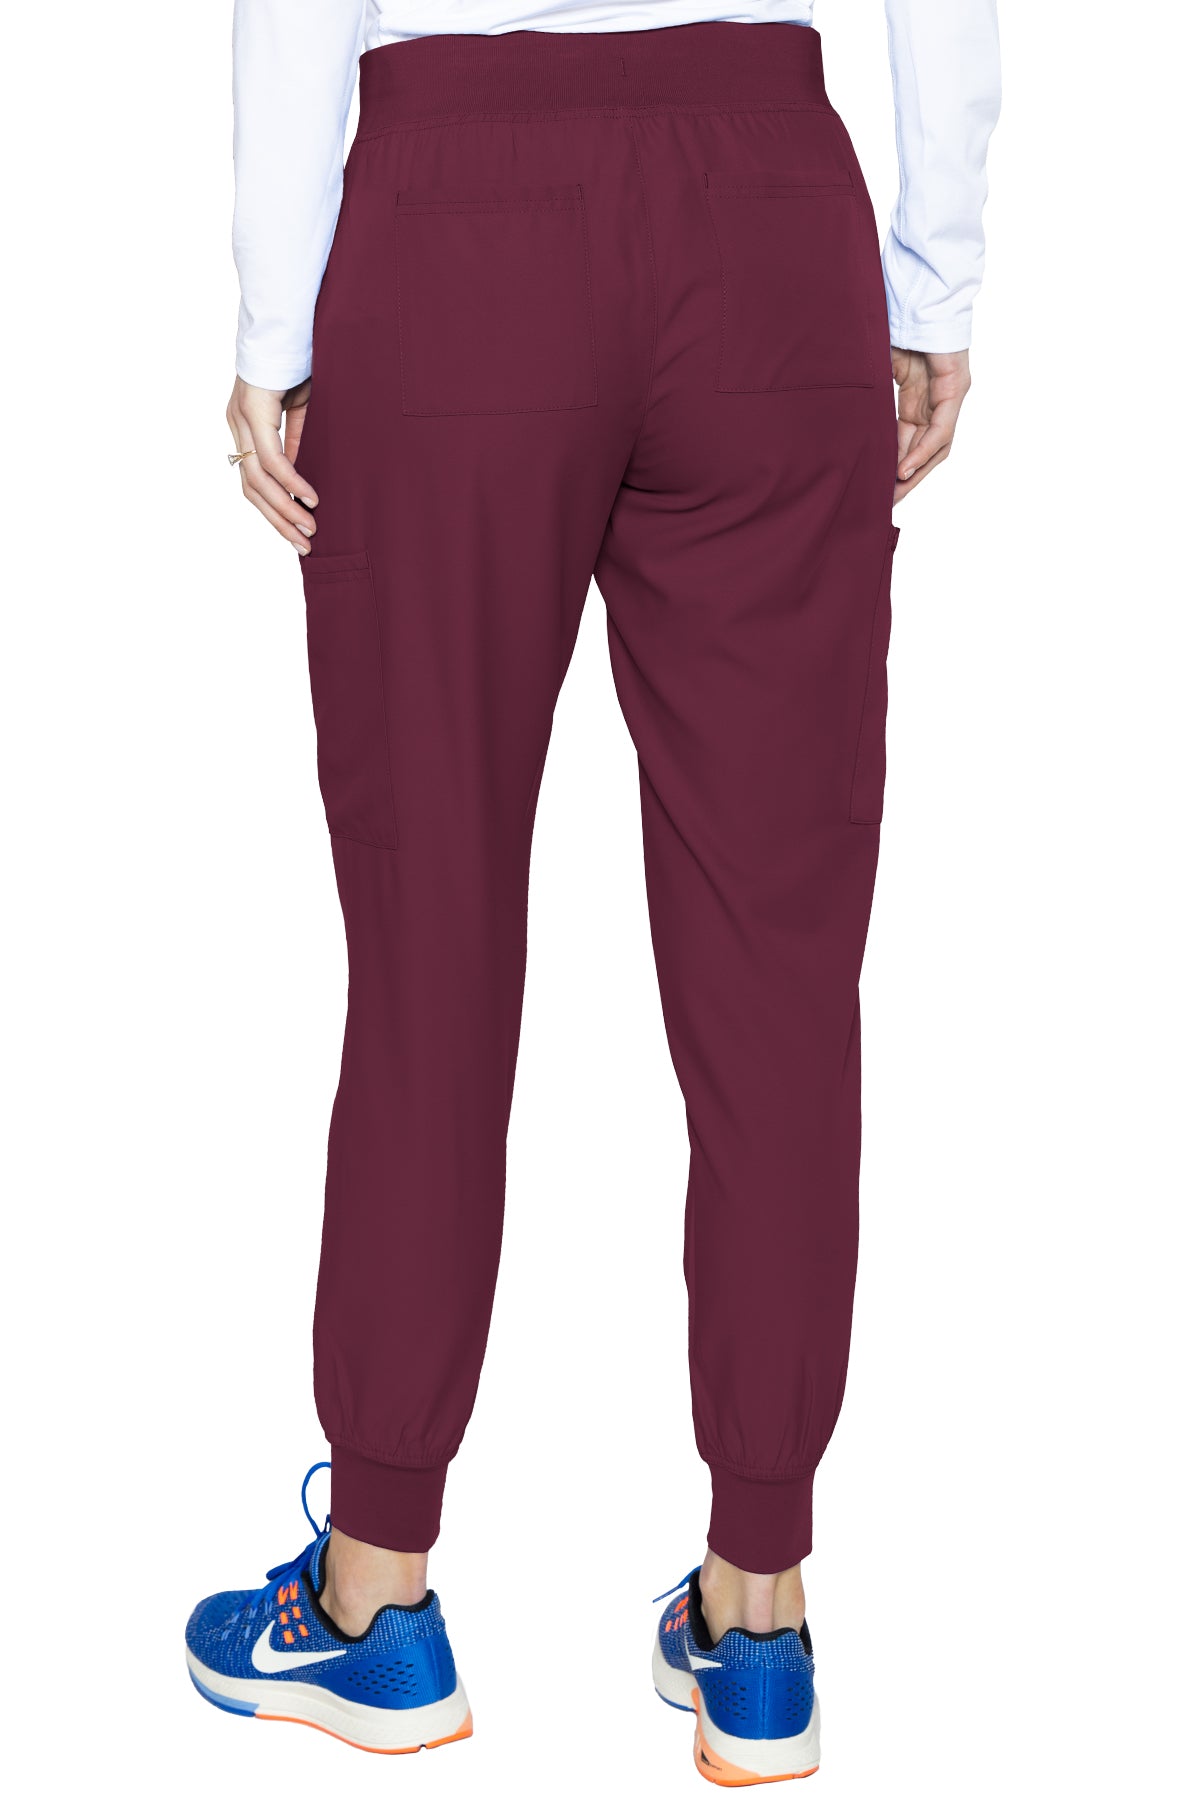 Med Couture 2711 Insight Women's Jogger Pant - PETITE – Valley